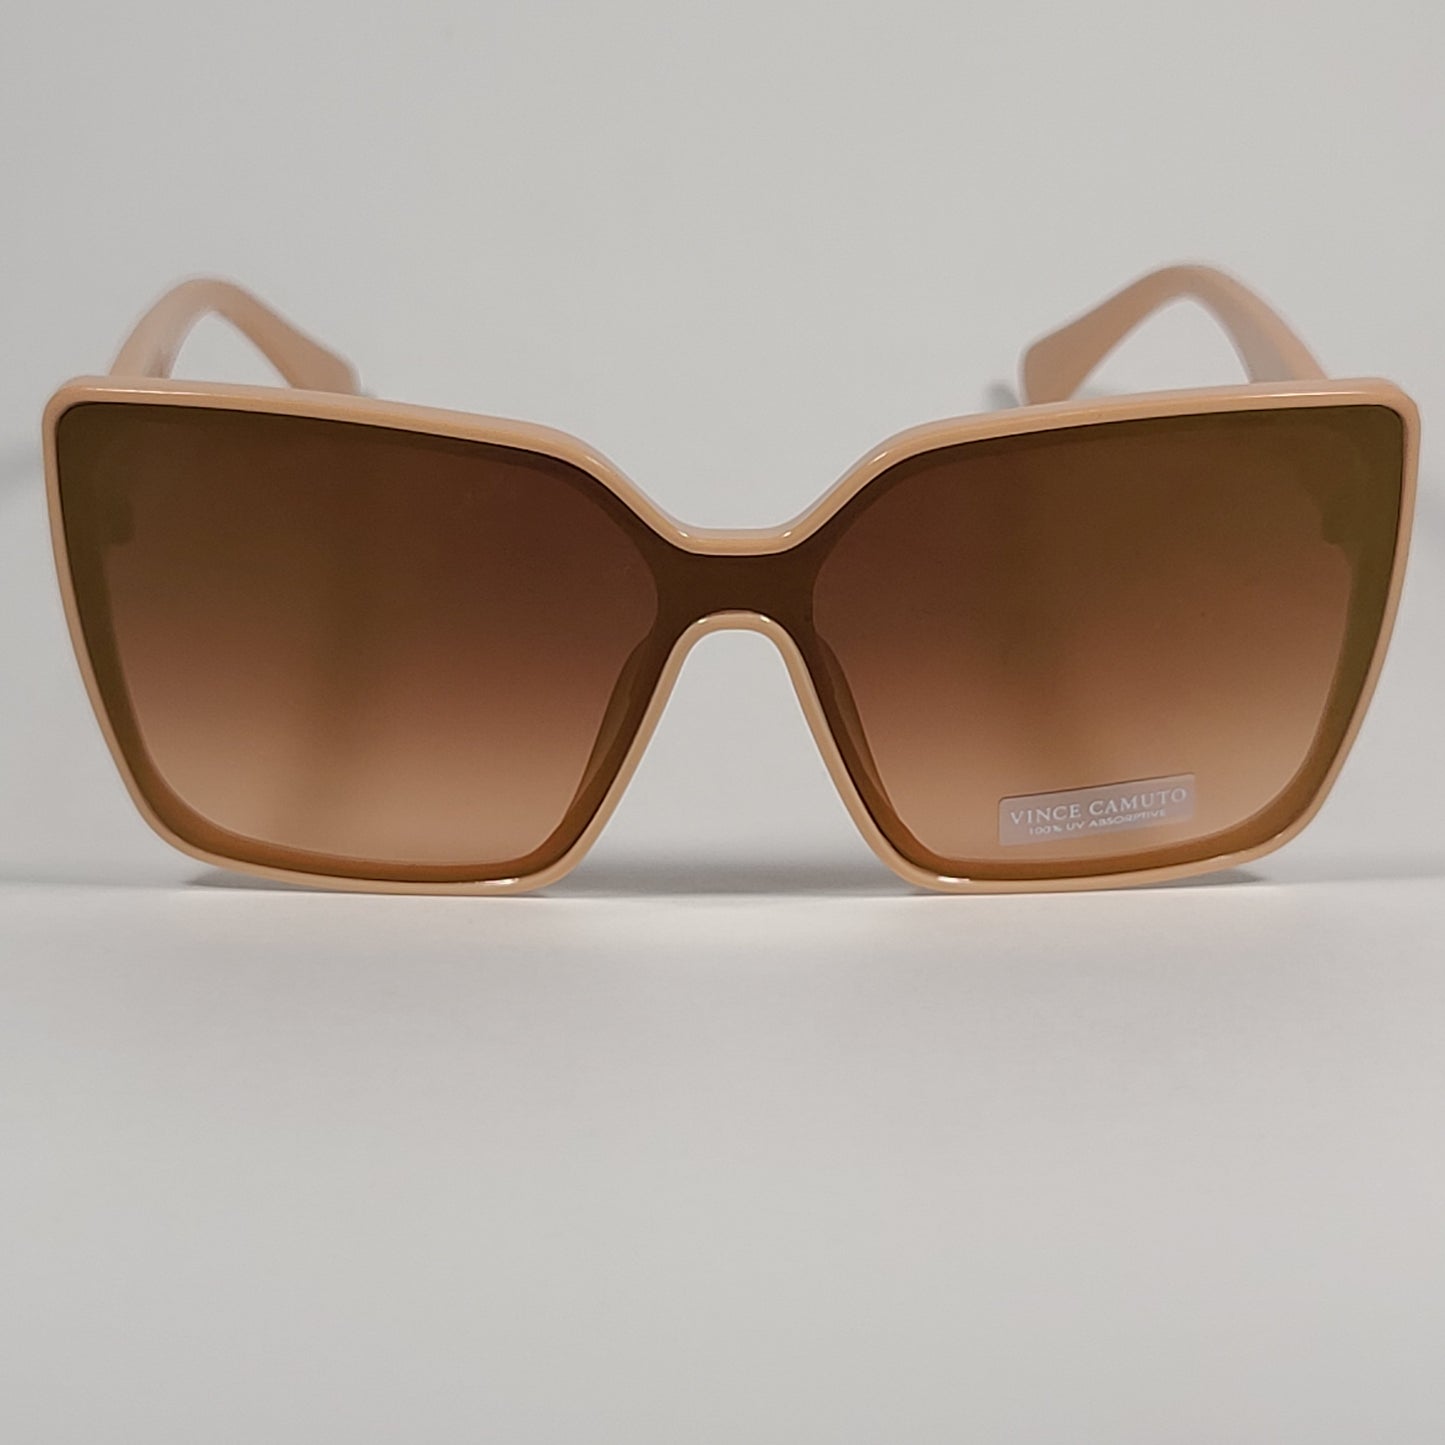 Vince Camuto VC999 ND Butterfly Shield Sunglasses Nude Frame Brown Gradient Lens With Gold Flash - Sunglasses